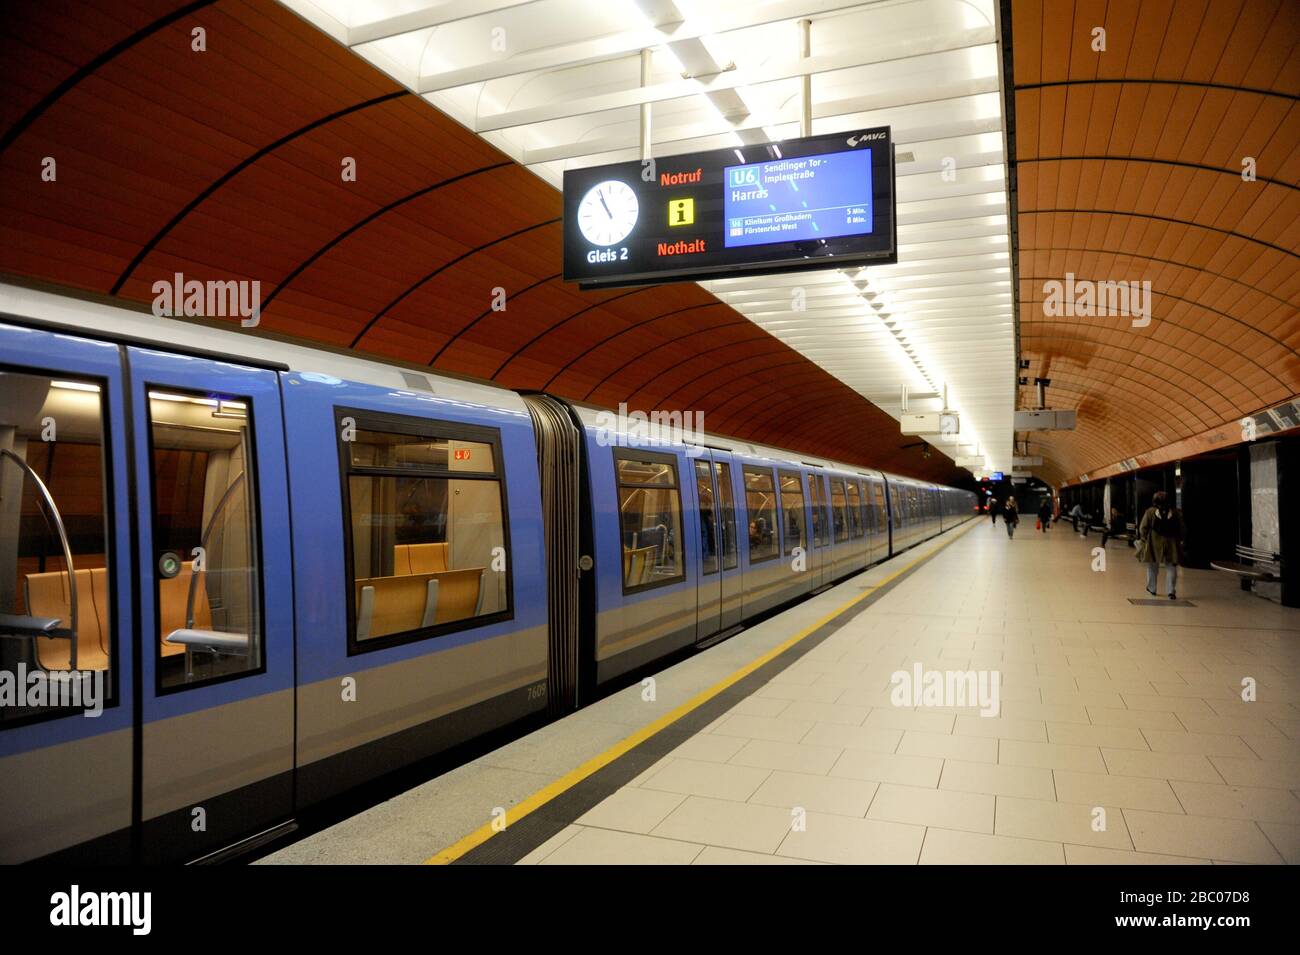 Effects of the corona virus: the tunnels and corridors of Munich's subway are almost empty. [automated translation] Stock Photo